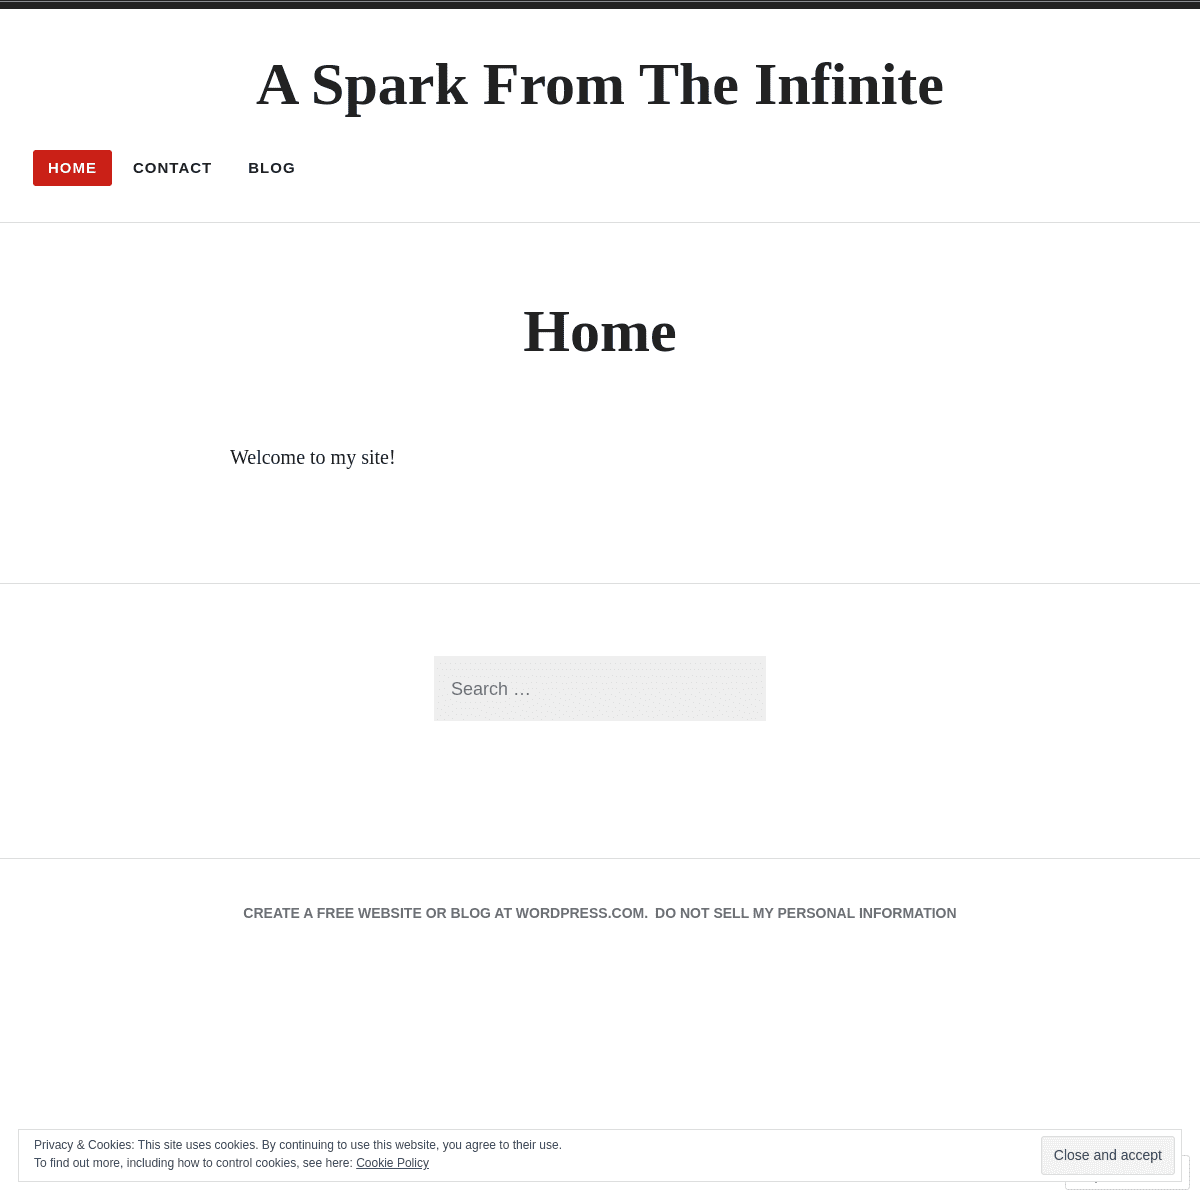 A complete backup of sparkfromtheinfinite.wordpress.com